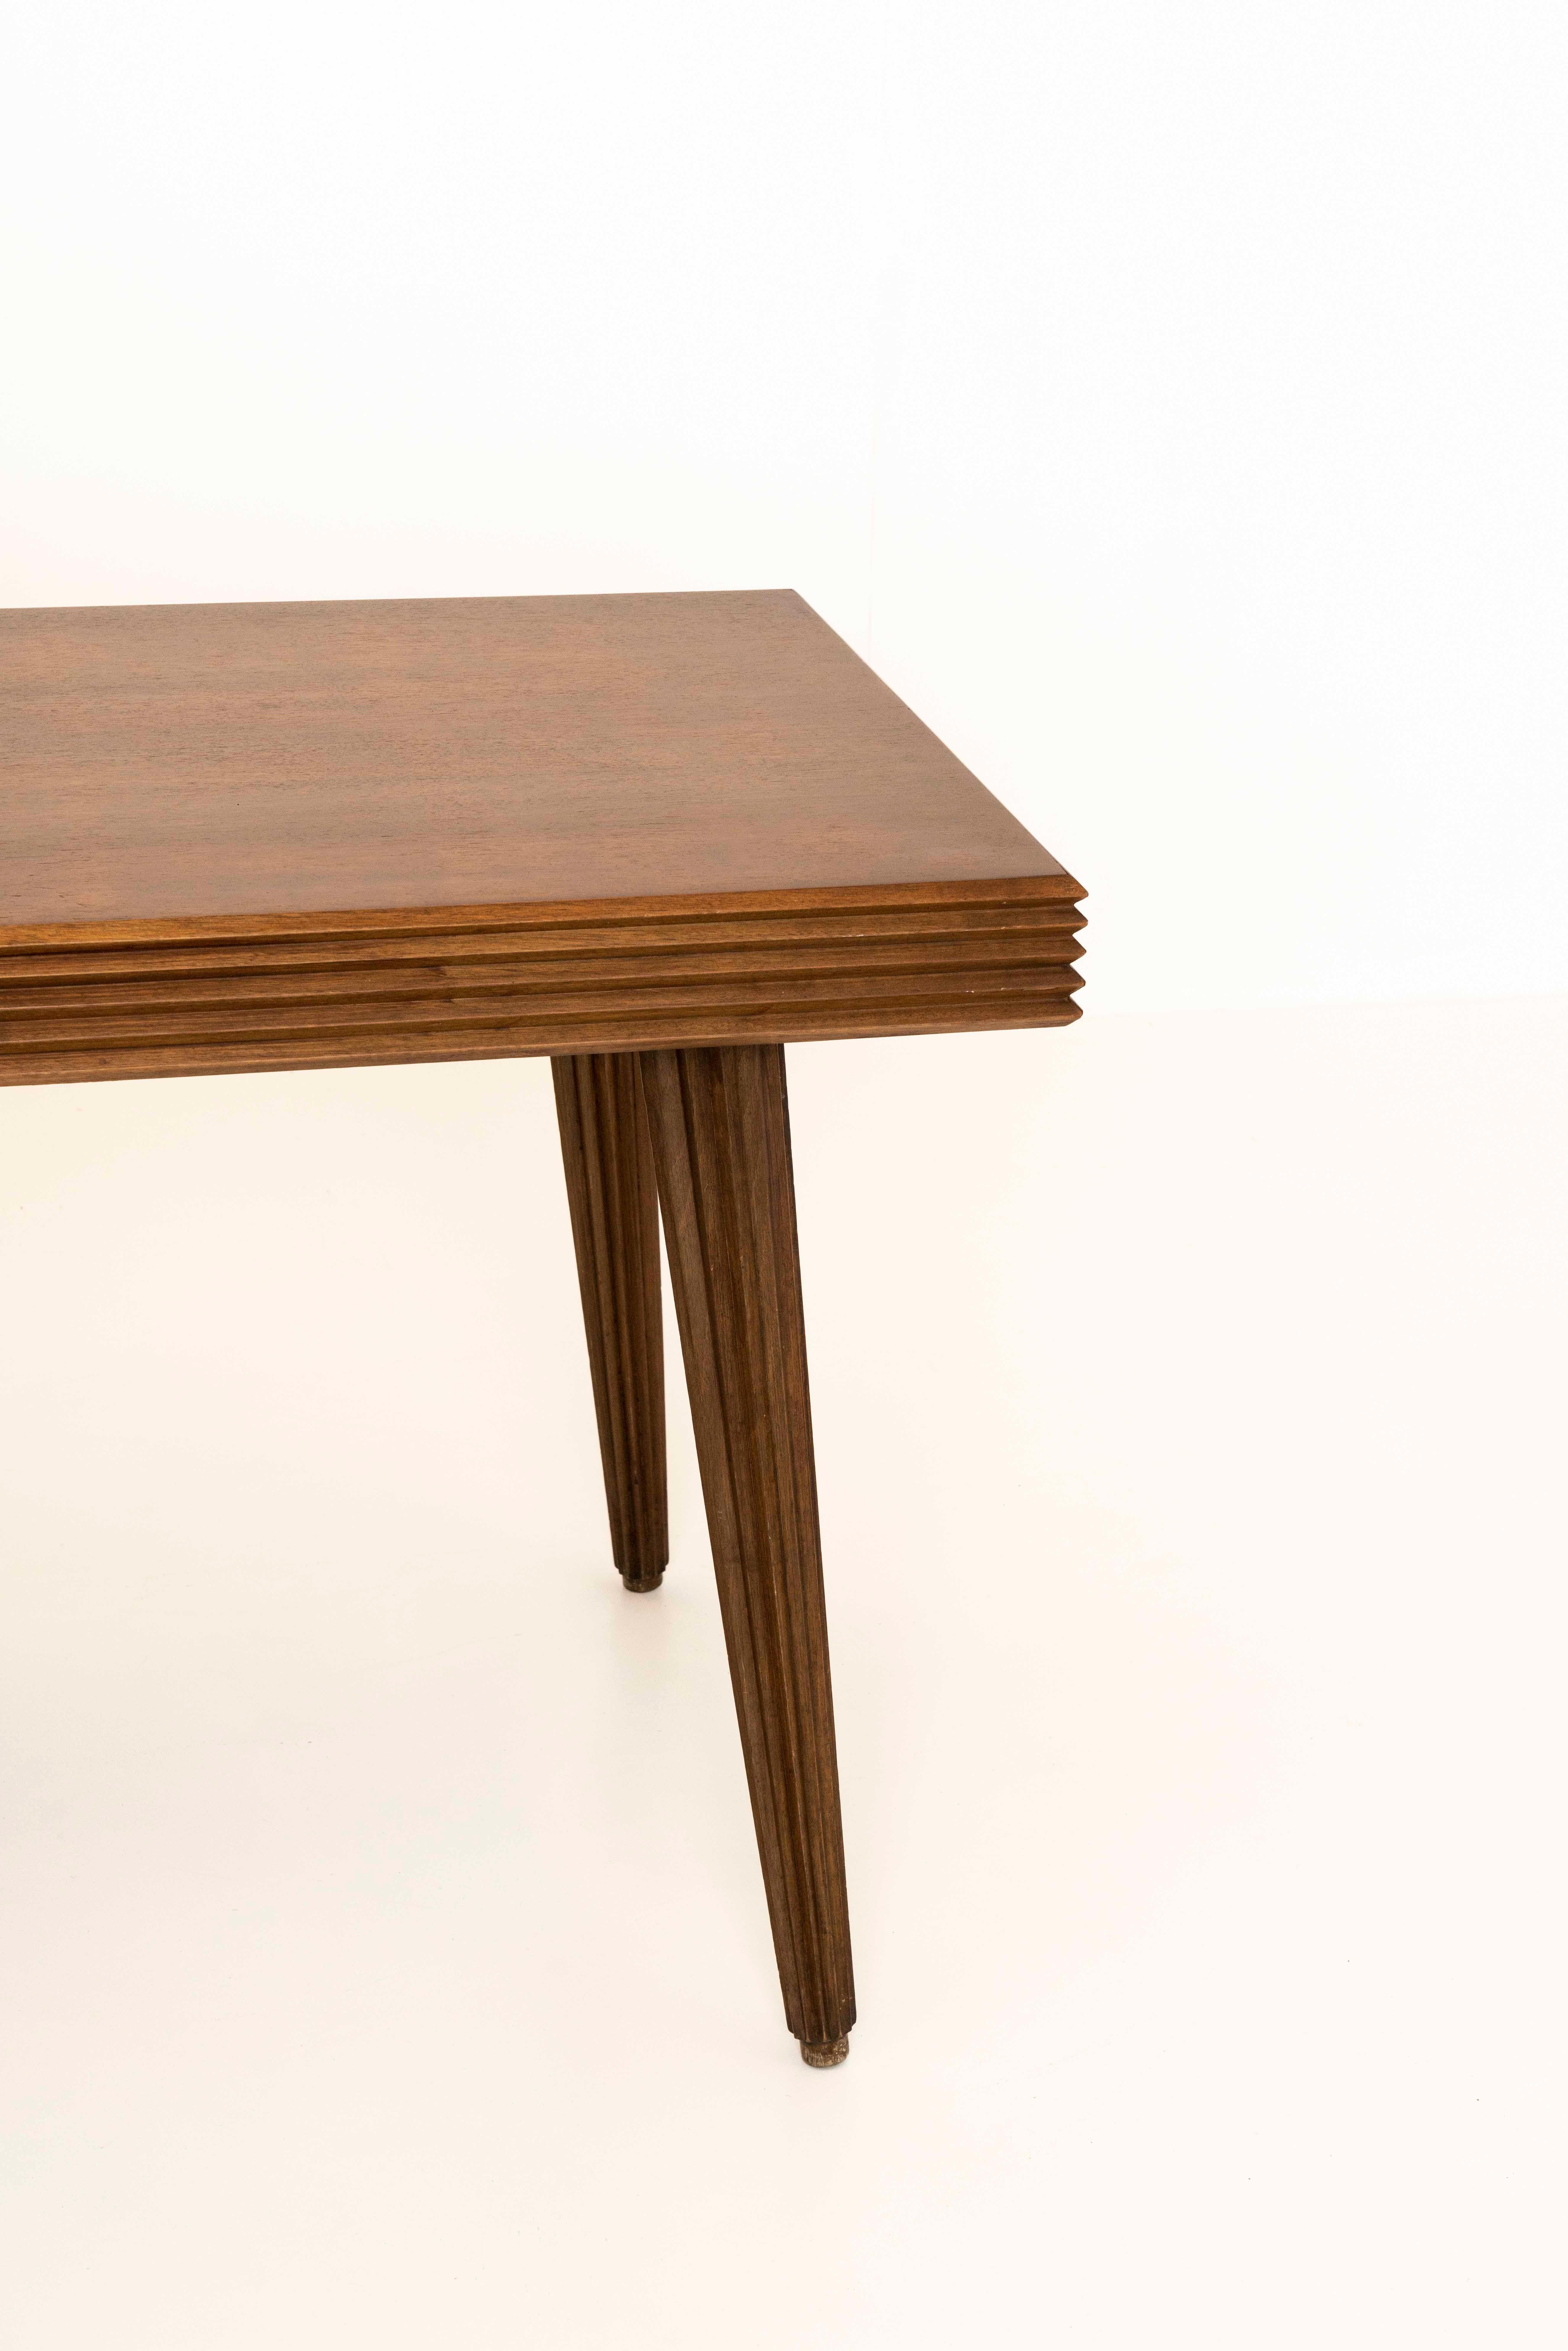 Gio Ponti Dining Table in Veneered Walnut, Italy 1940s In Good Condition For Sale In Hellouw, NL